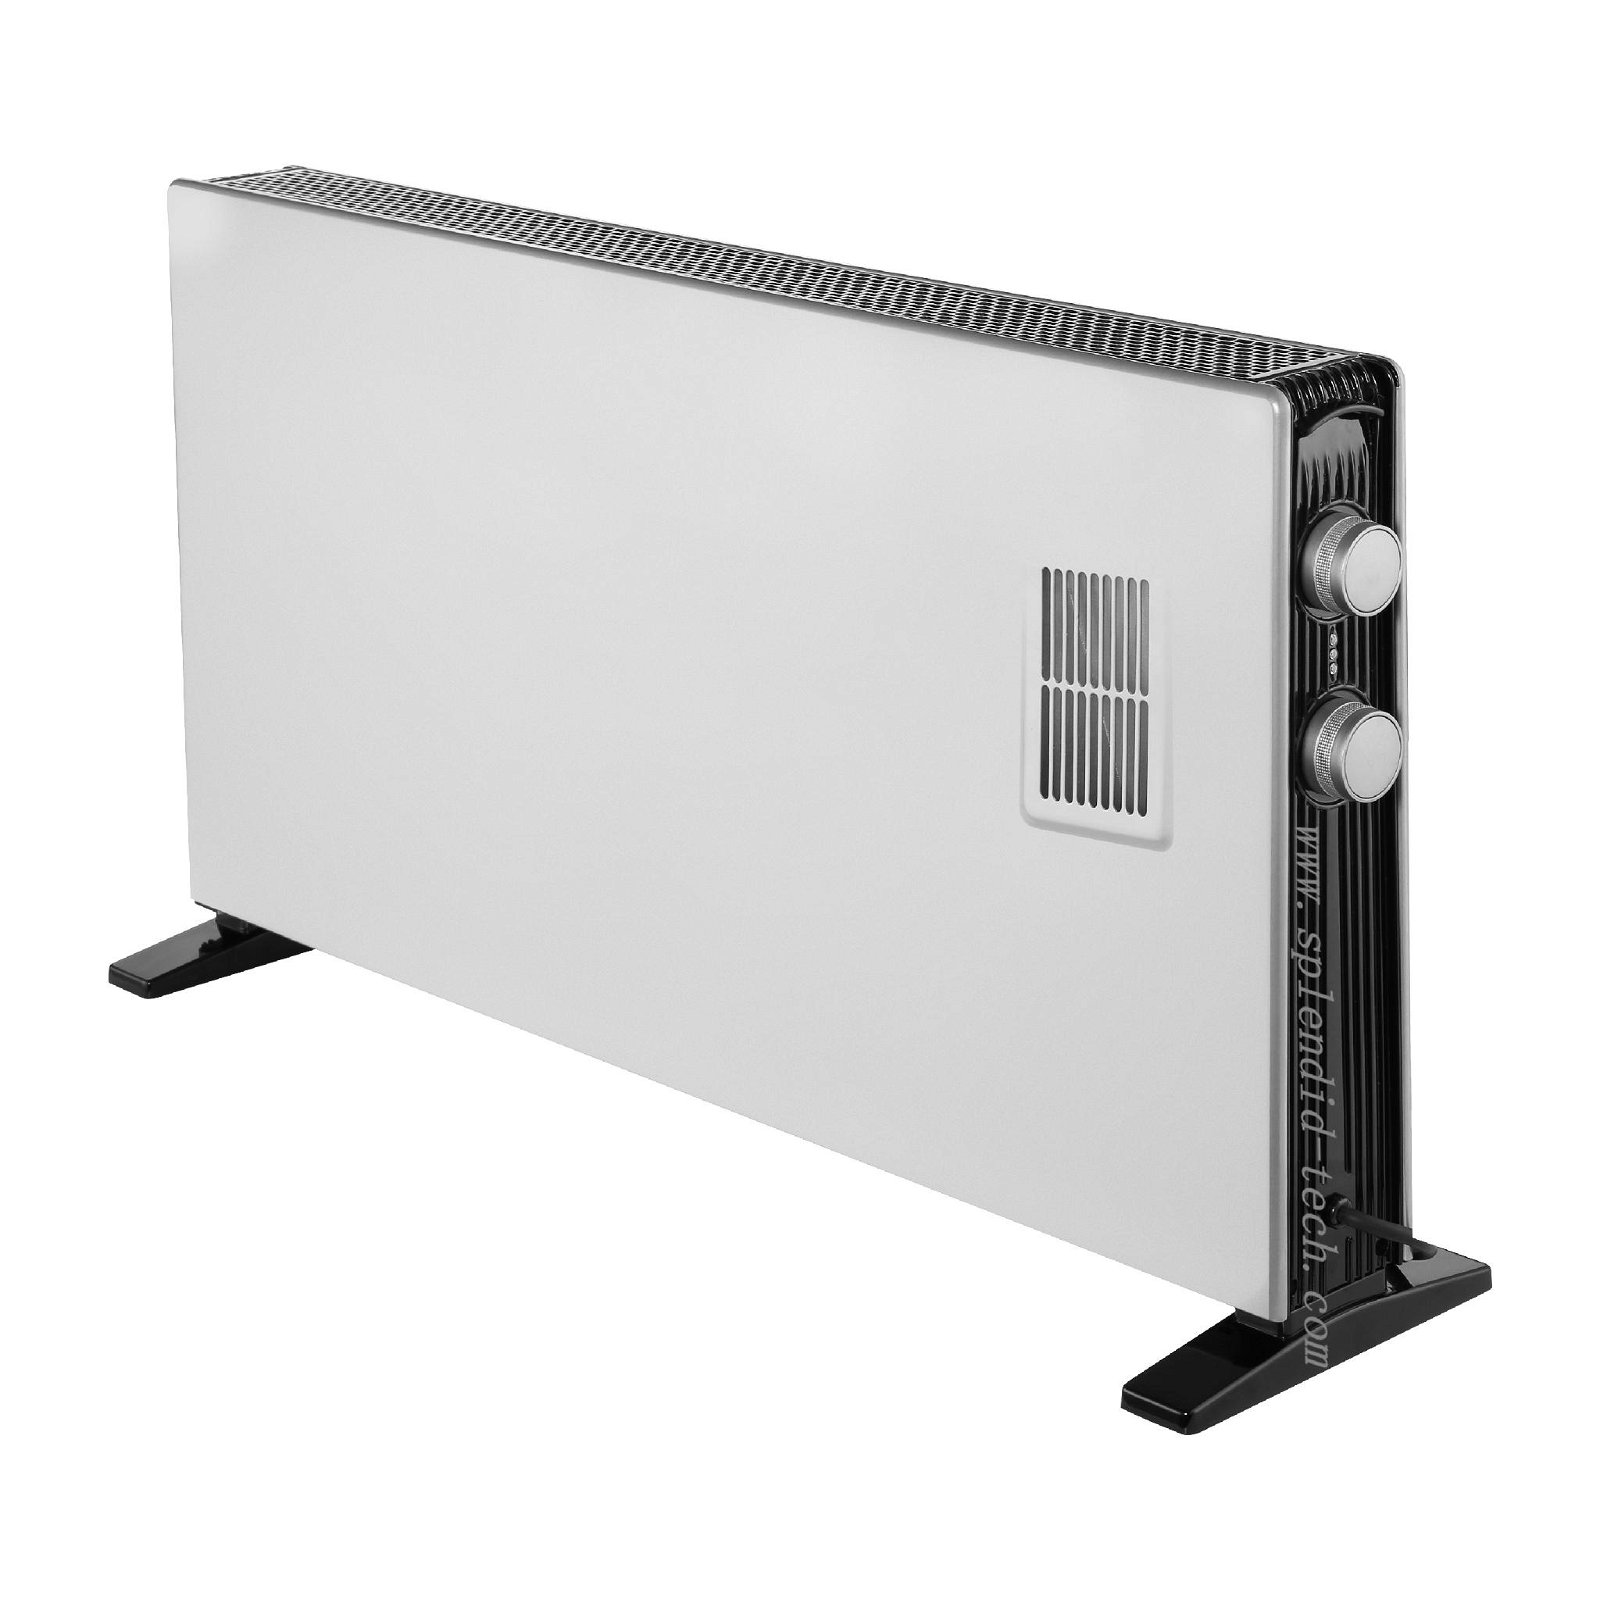 Slim style portable convector heater with turbo fan